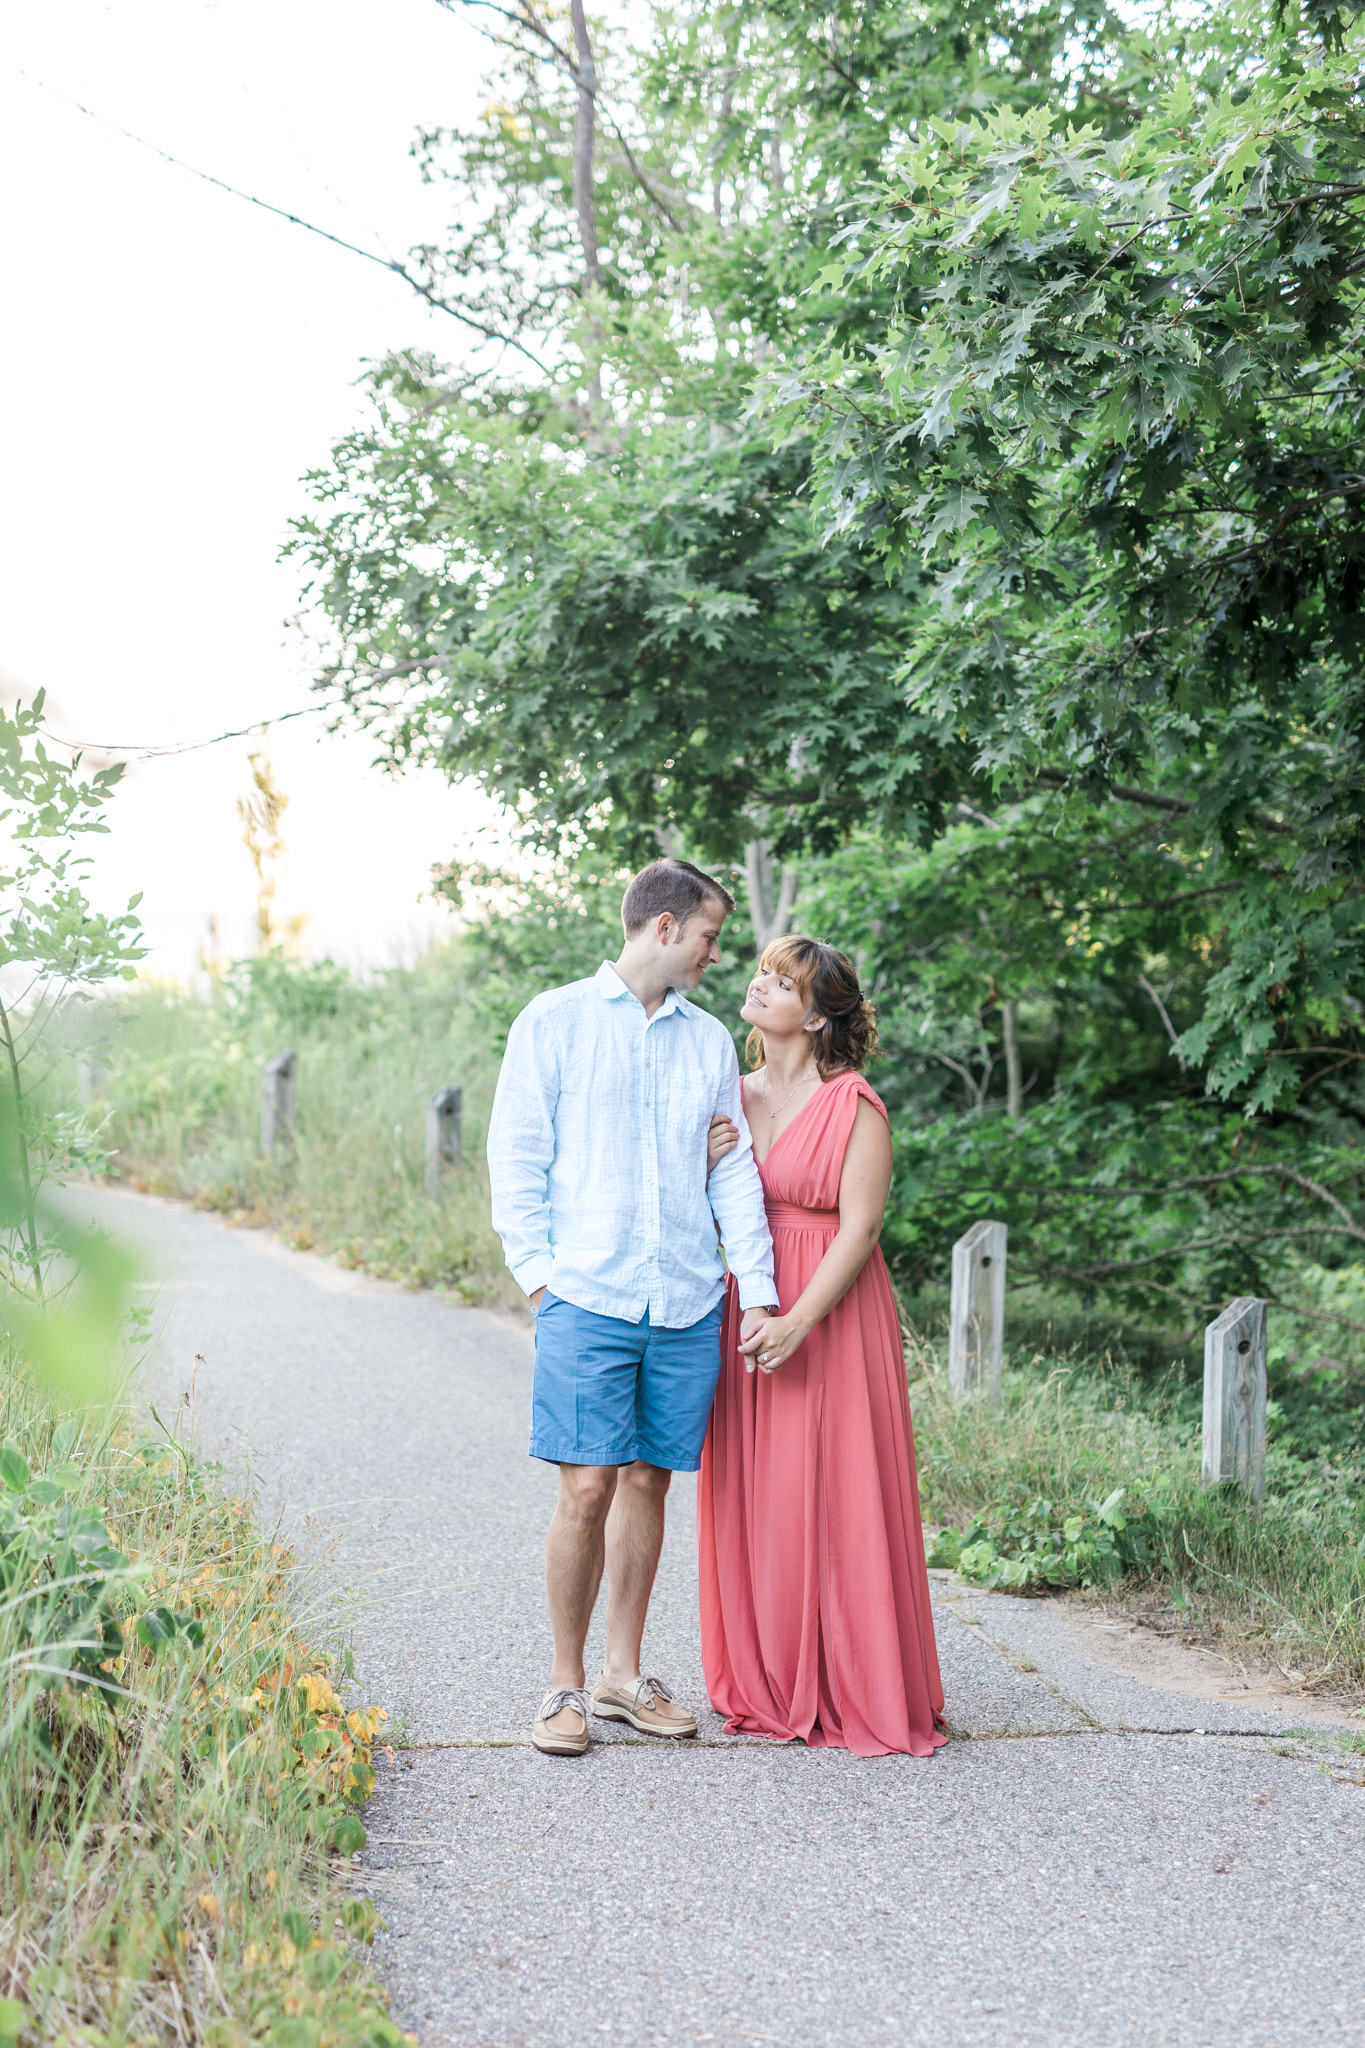 Romantic beach engagement session in West Olive Michigan | Laurenda Marie Photography